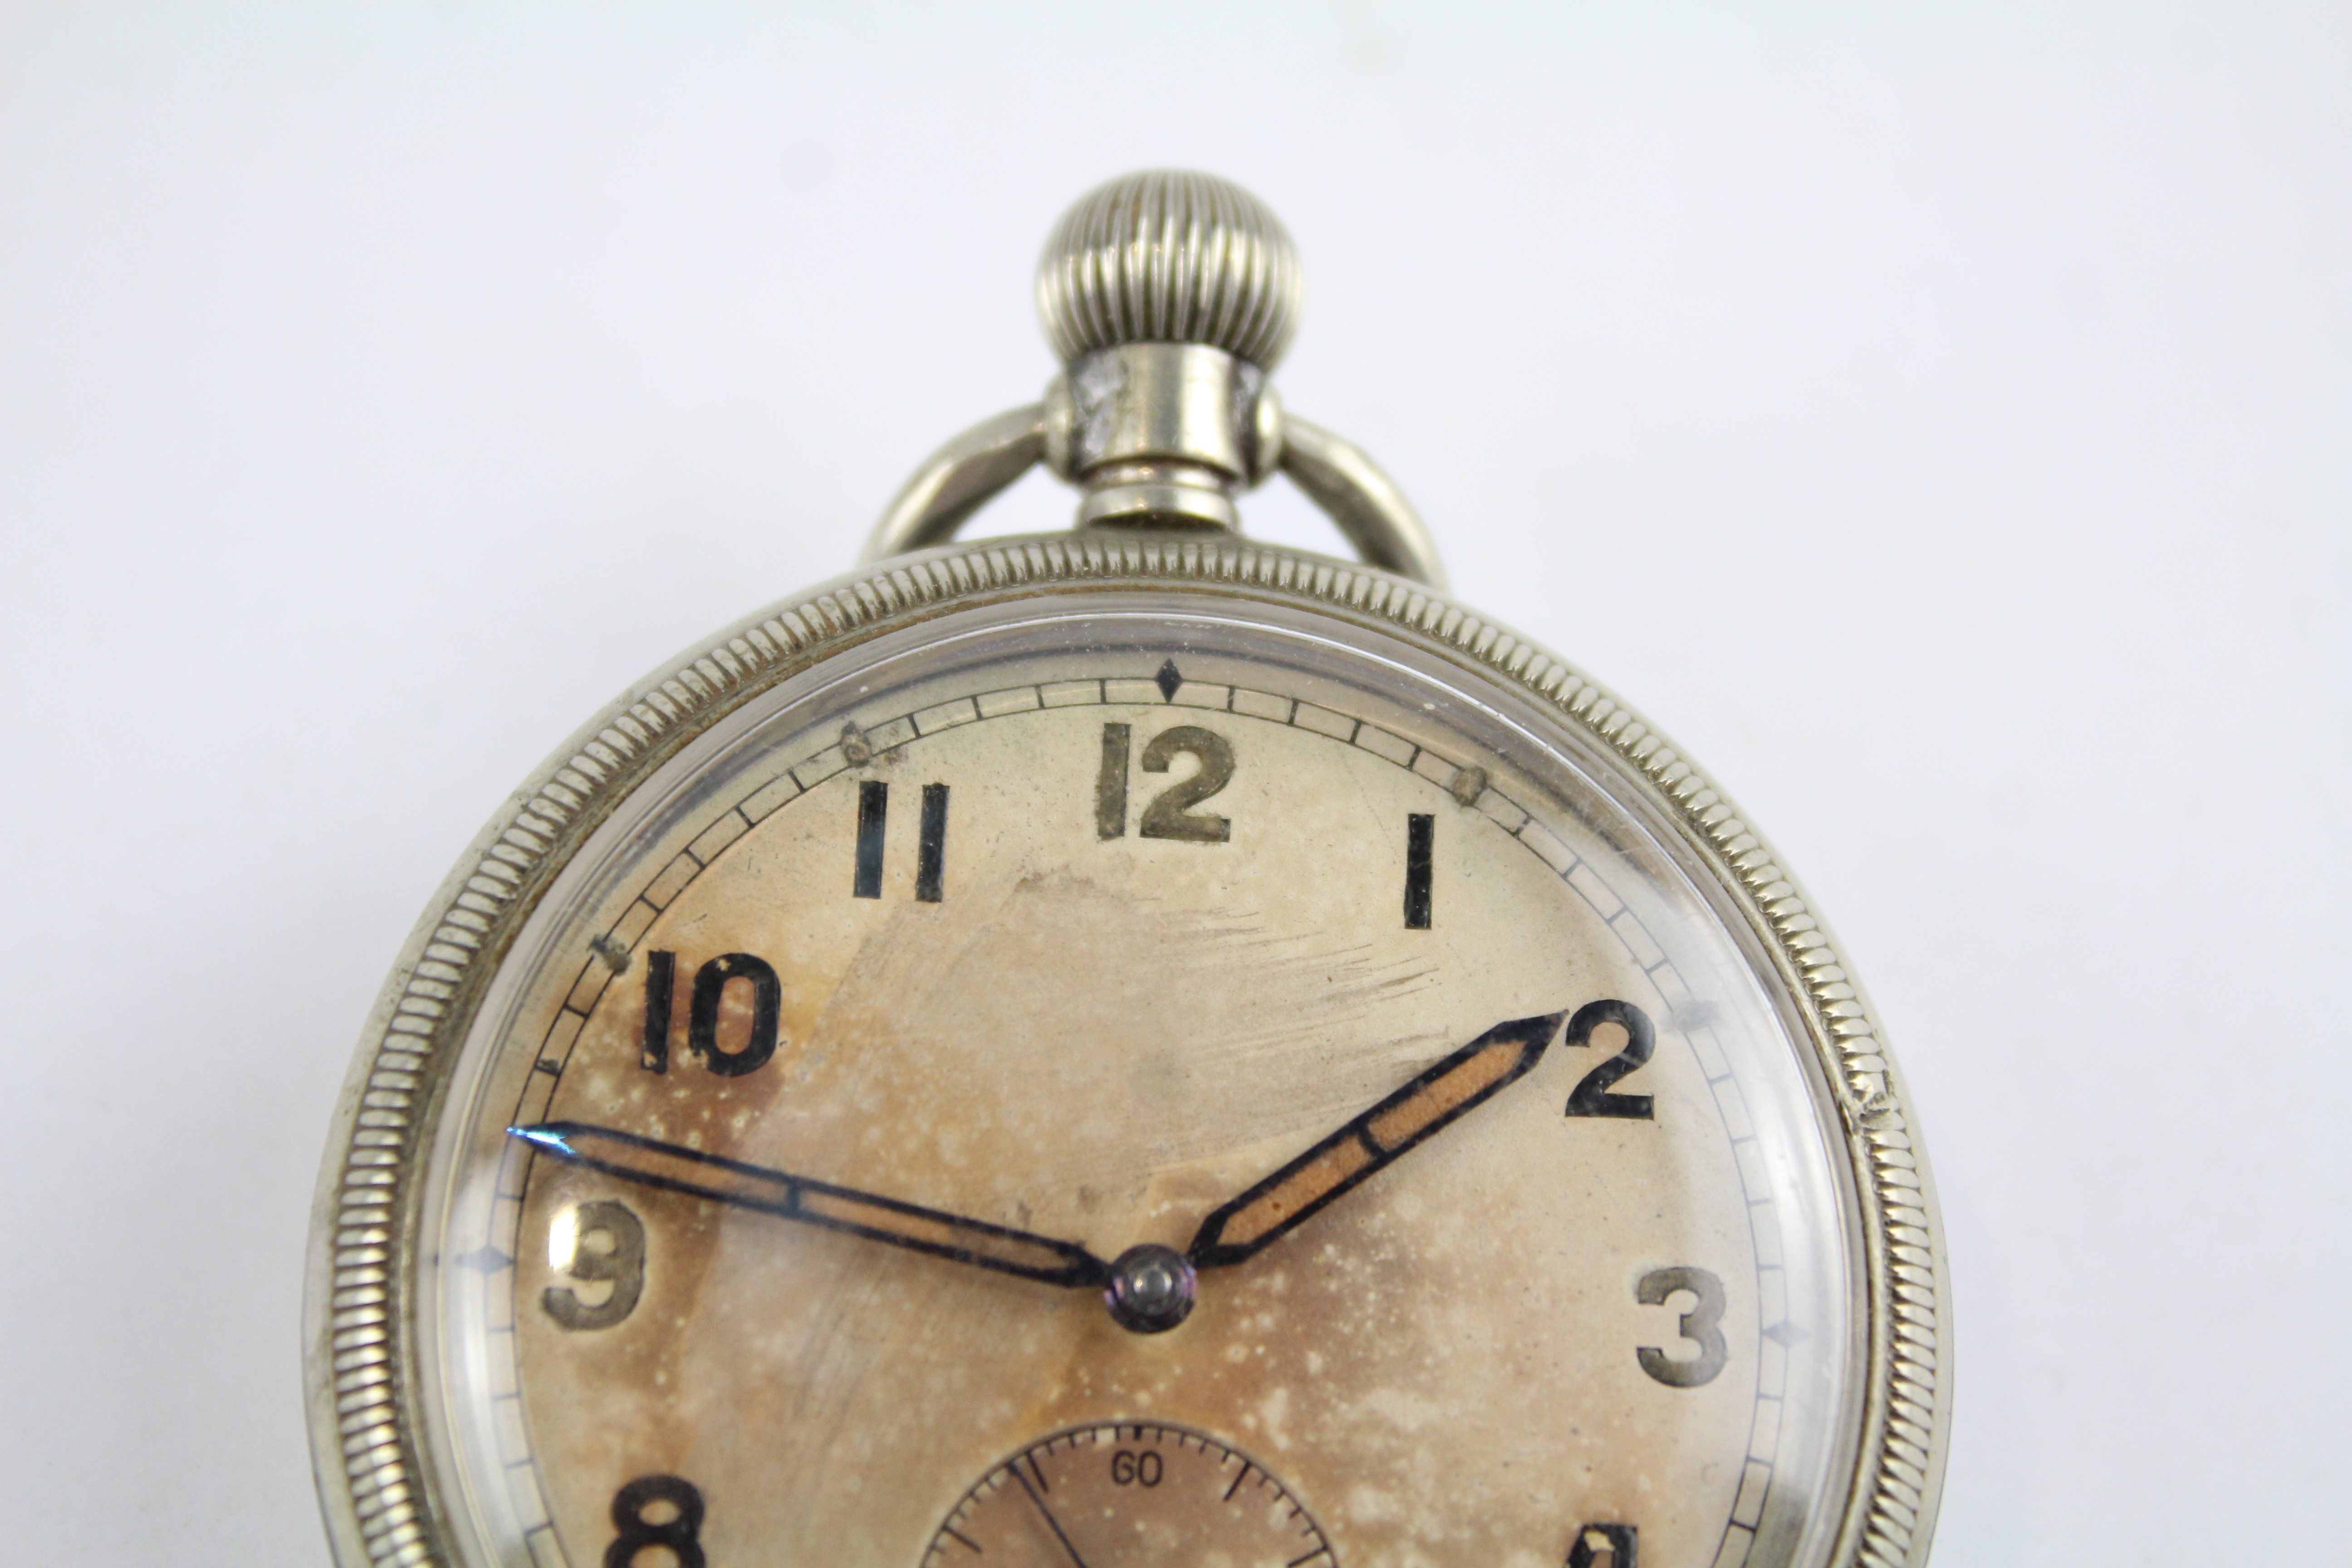 GS/TP Military Issued Gents WWII Era POCKET WATCH Hand-wind WORKING 404869 - Image 2 of 6